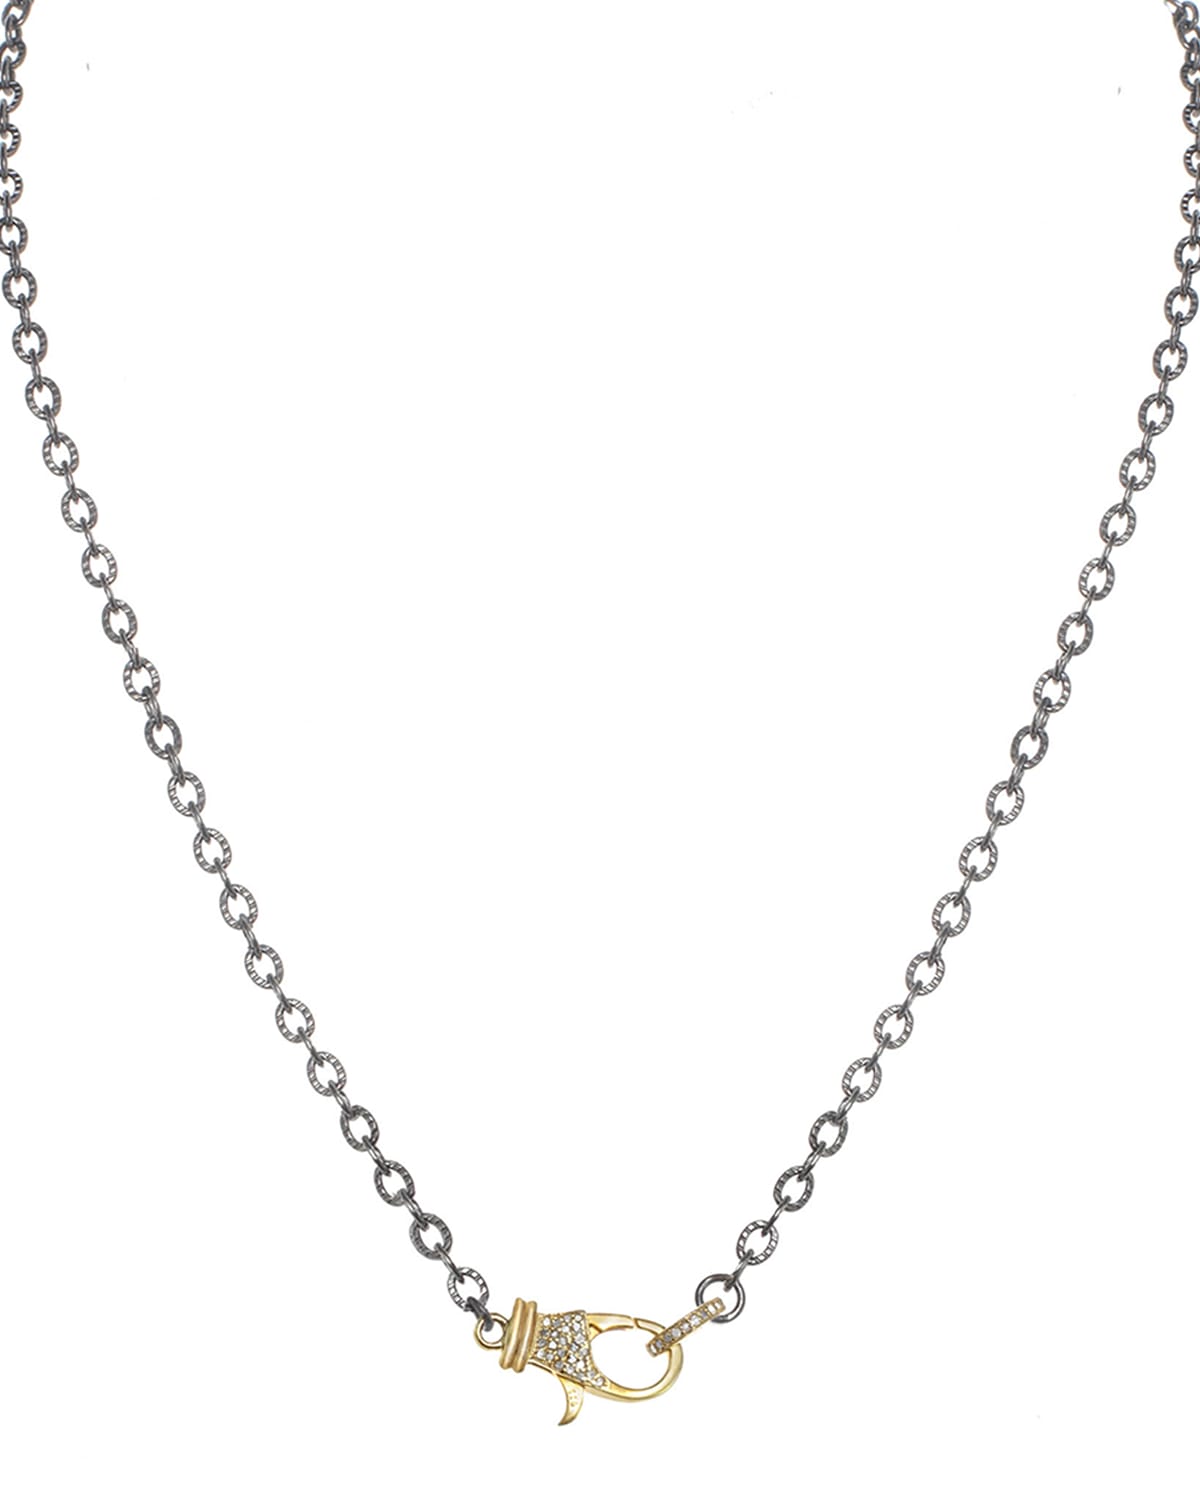 Rhodium Finish Sterling Silver Chain with Vermeil and Diamond Clasp